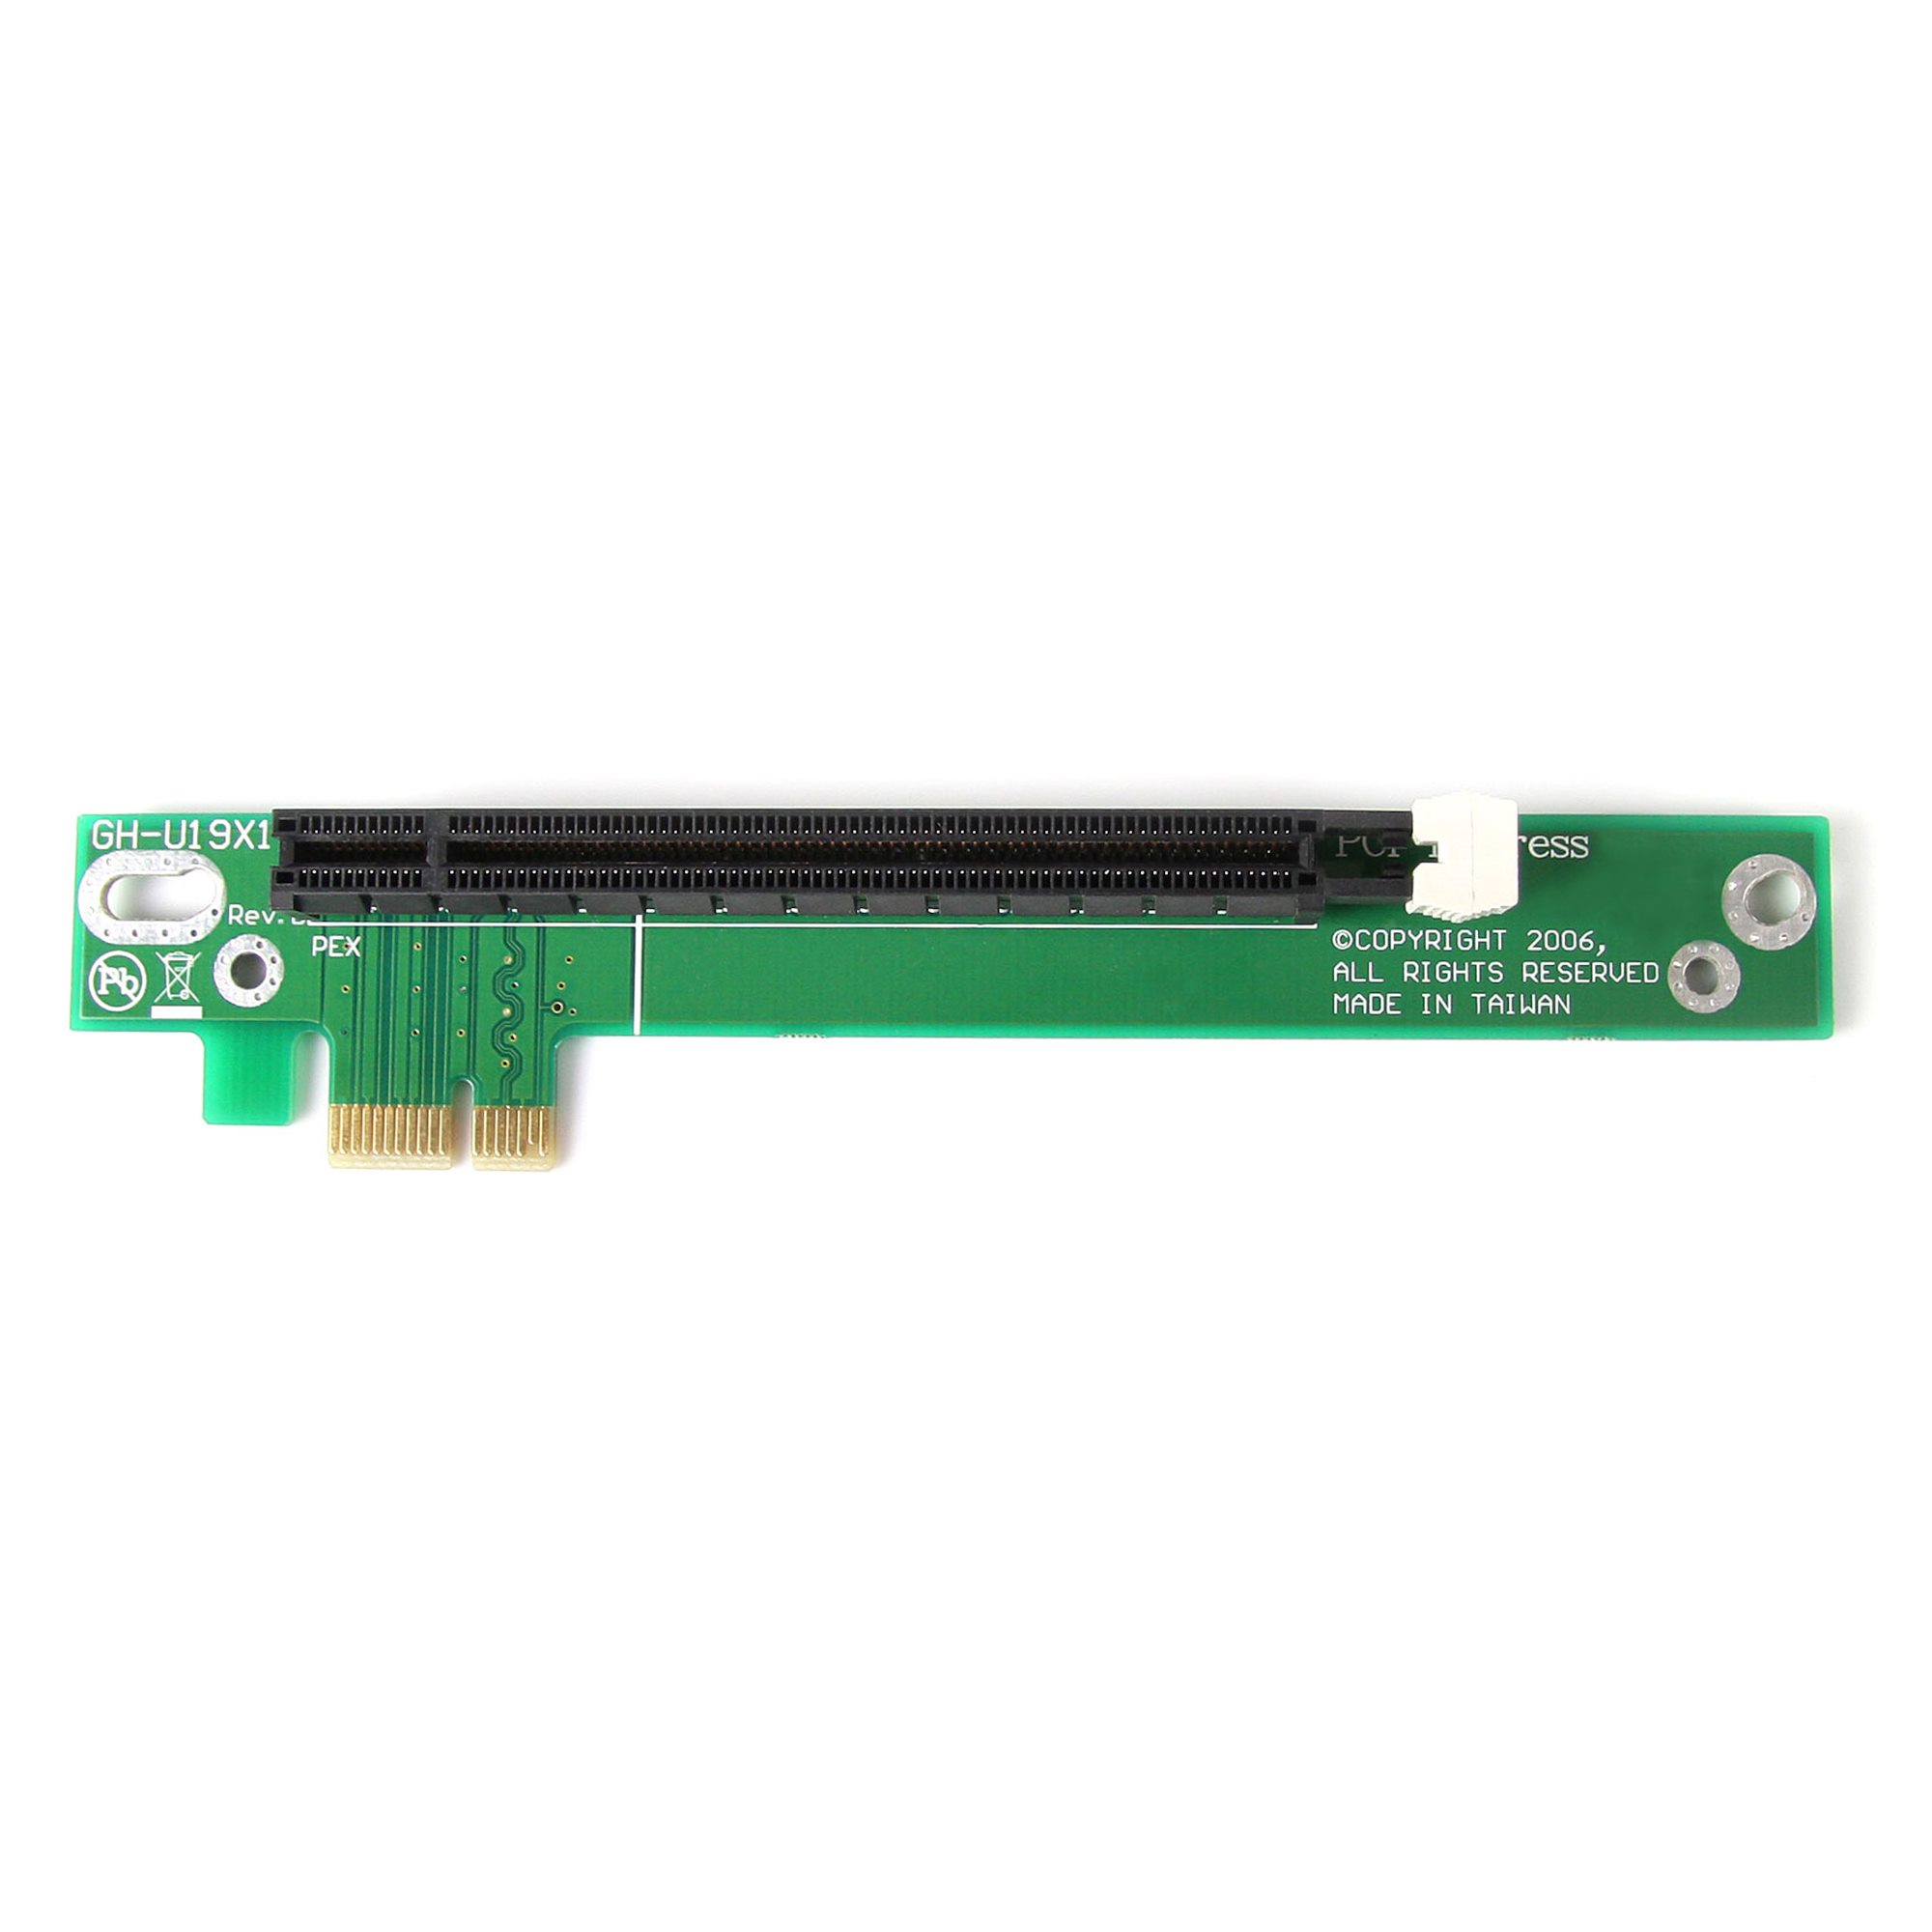 PCIe x1 to x16 Adapter StarTech.com PCI Express X1 to X16 Low Profile Slot Extension Adapter 